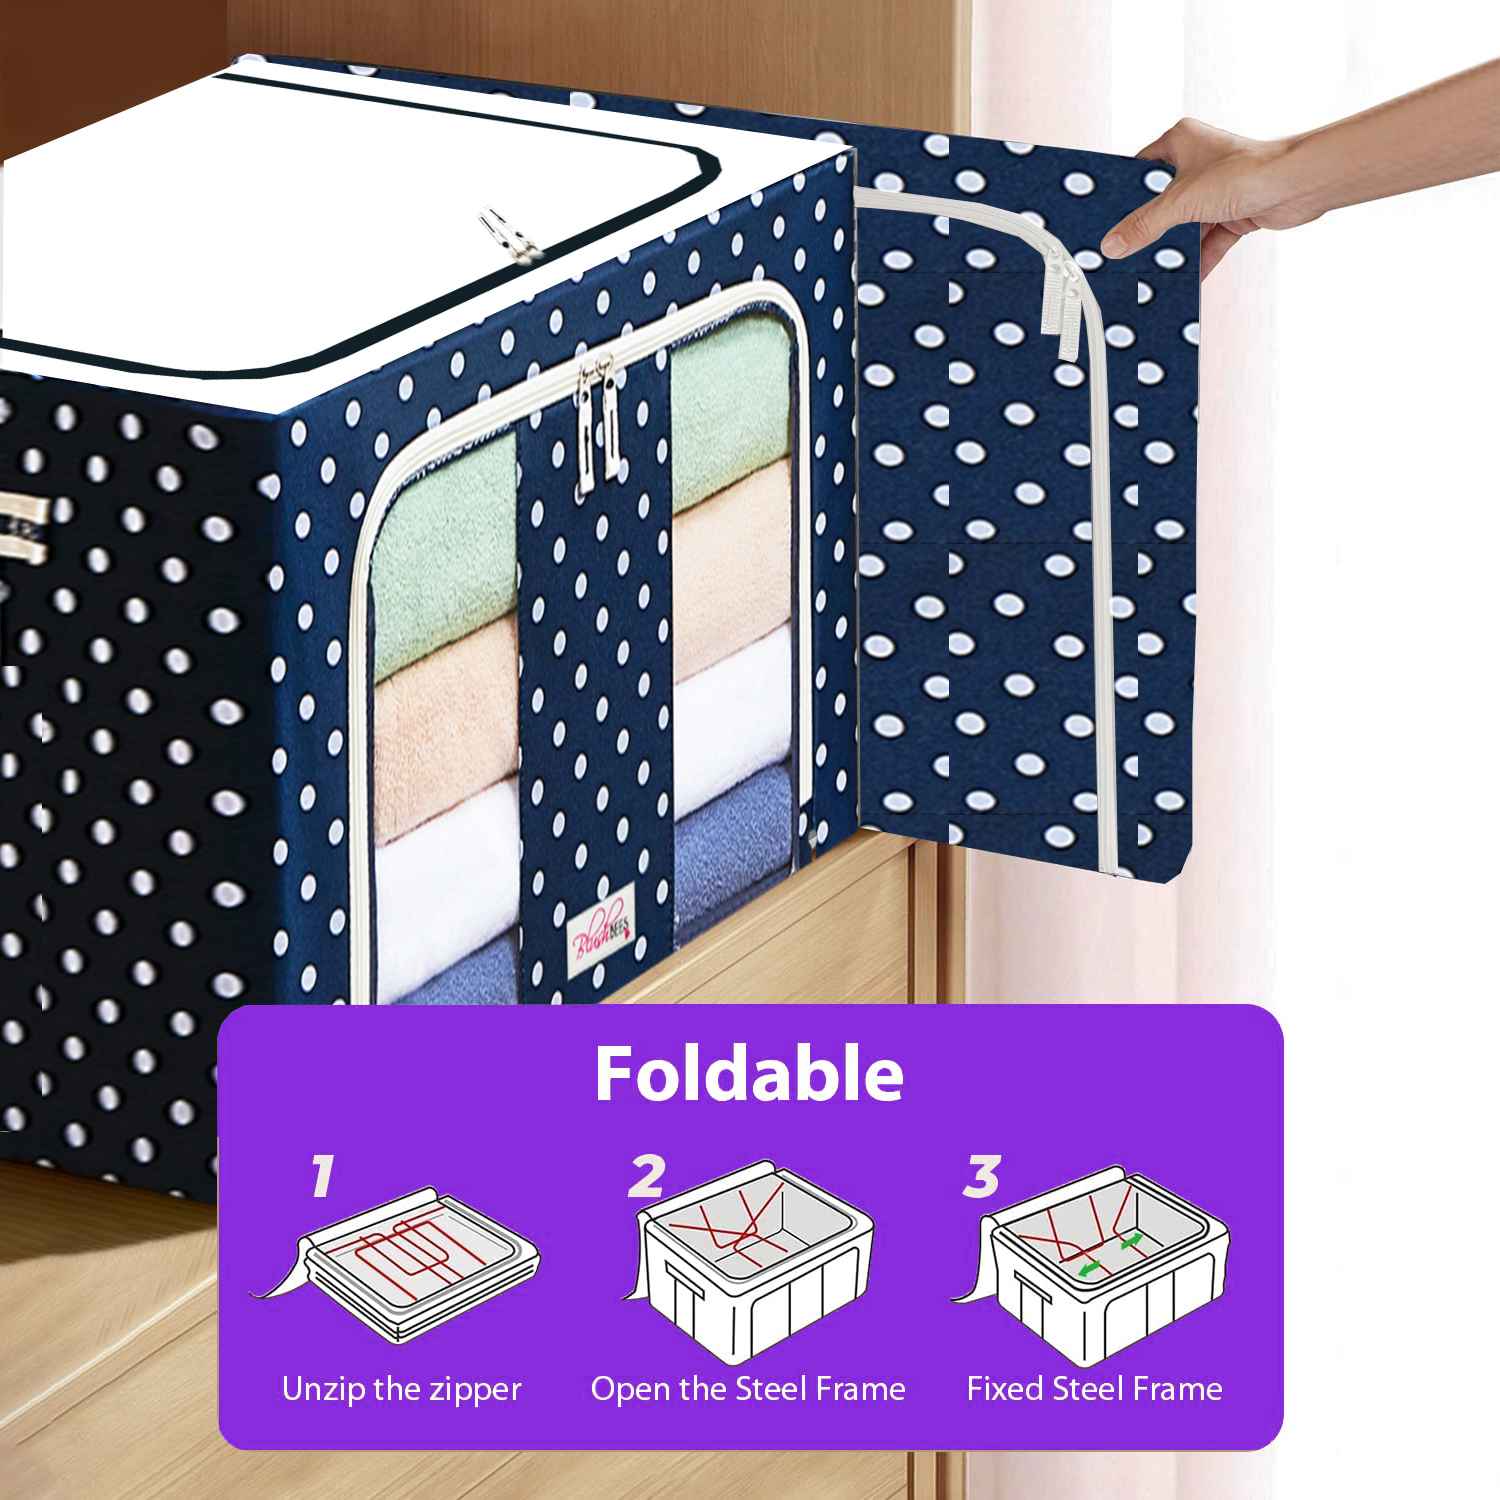 BlushBees® Storage Containers, For Clothes, Blankets, Kitchen